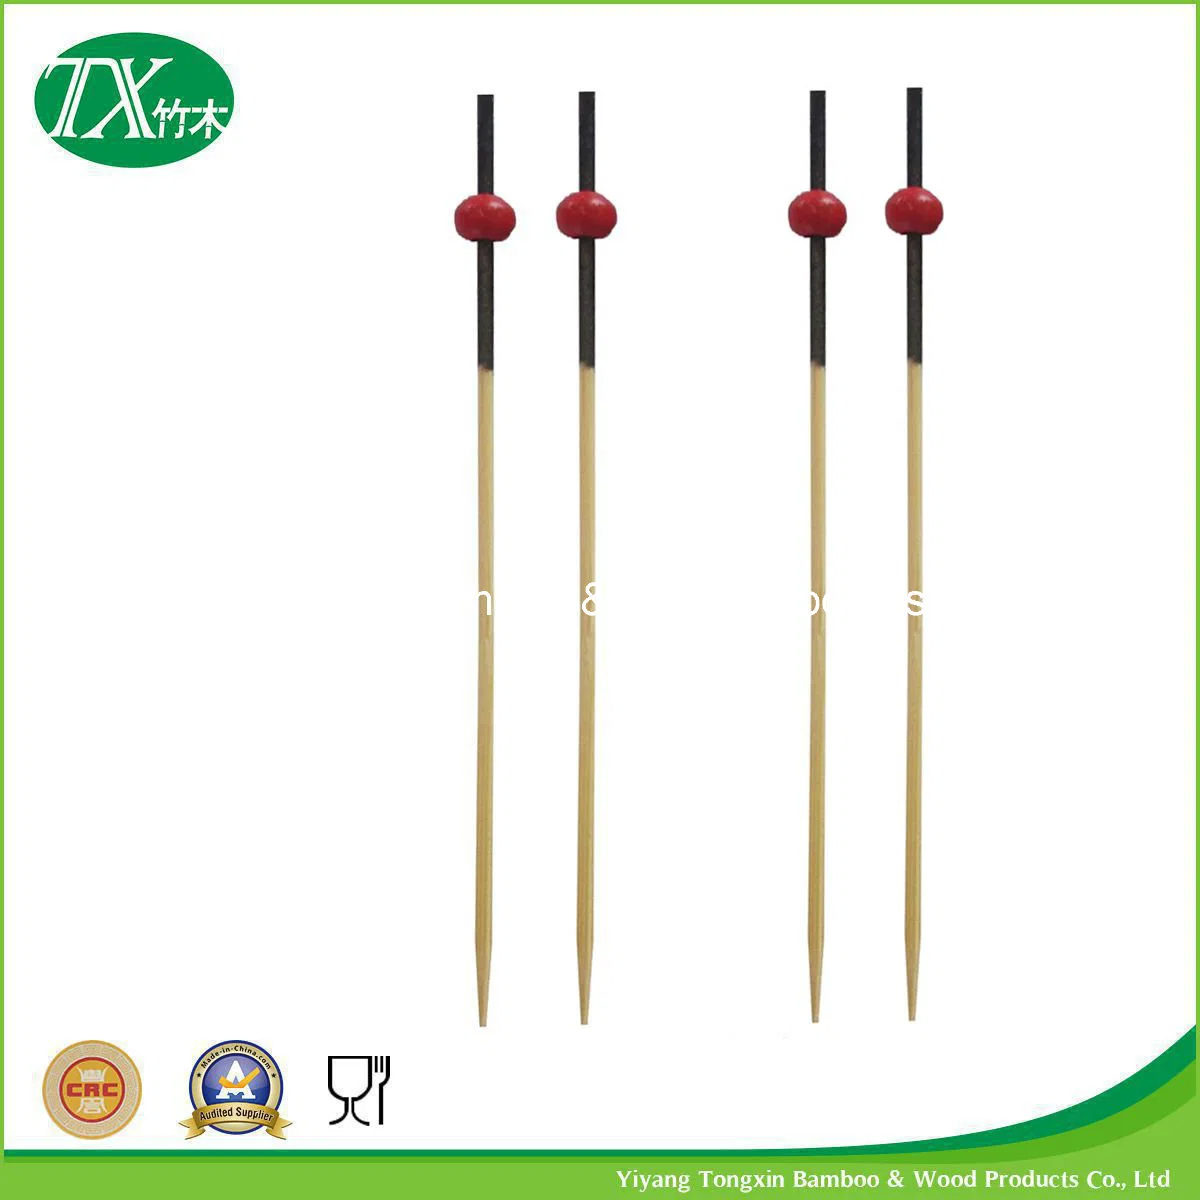 Disposable Bamboo Flower Sticks or Skewers